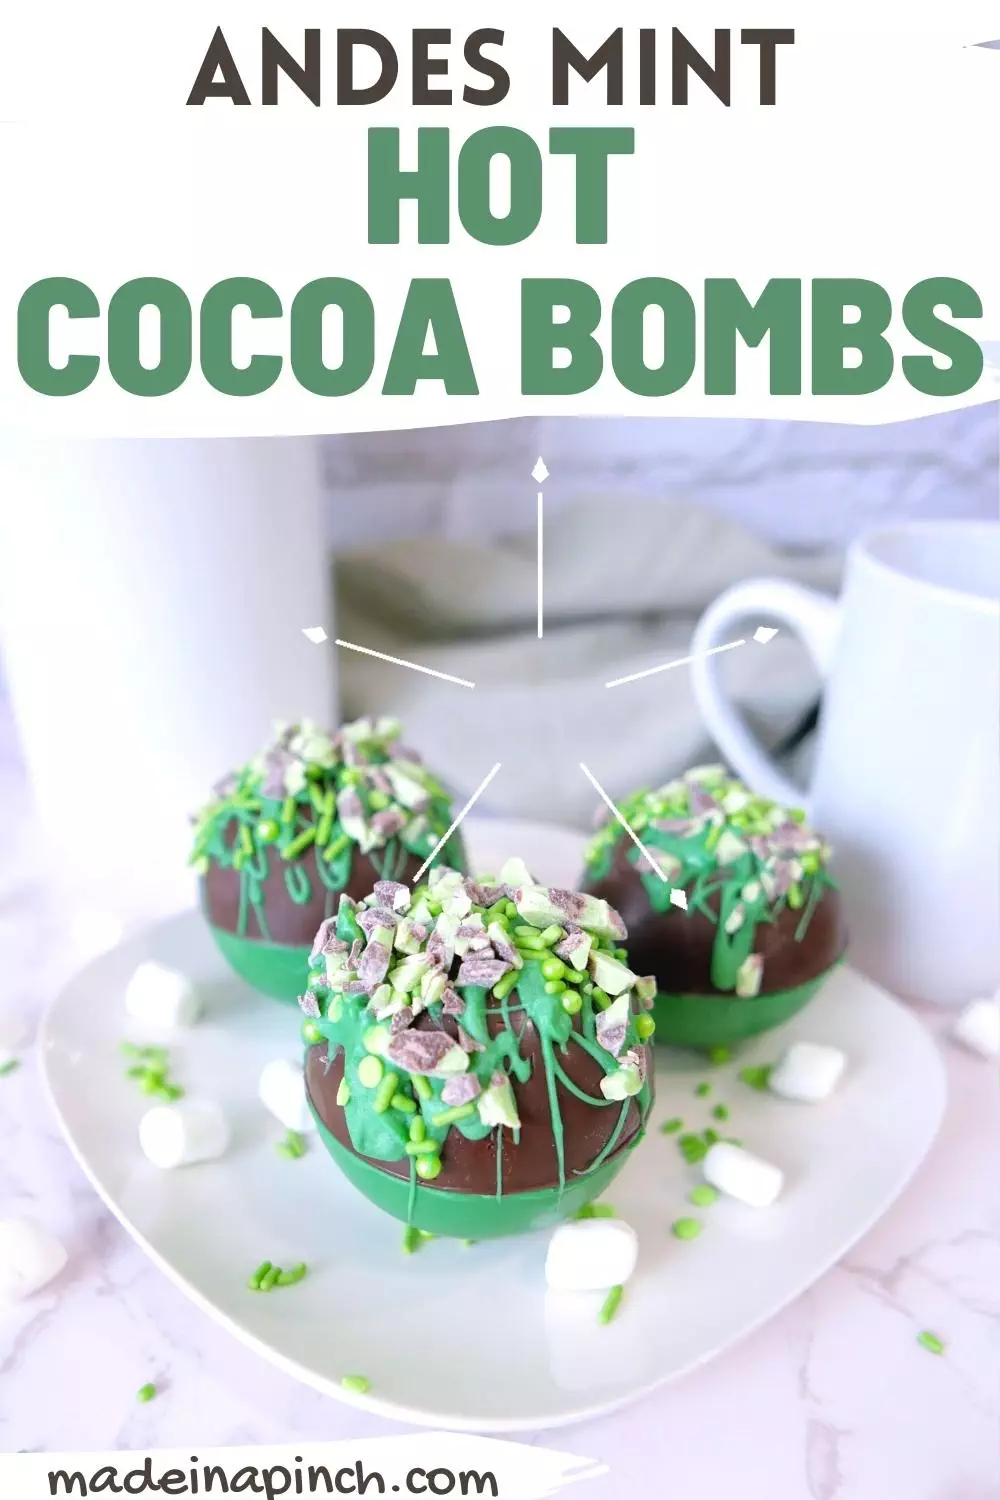 Andes mint hot cocoa bombs pin